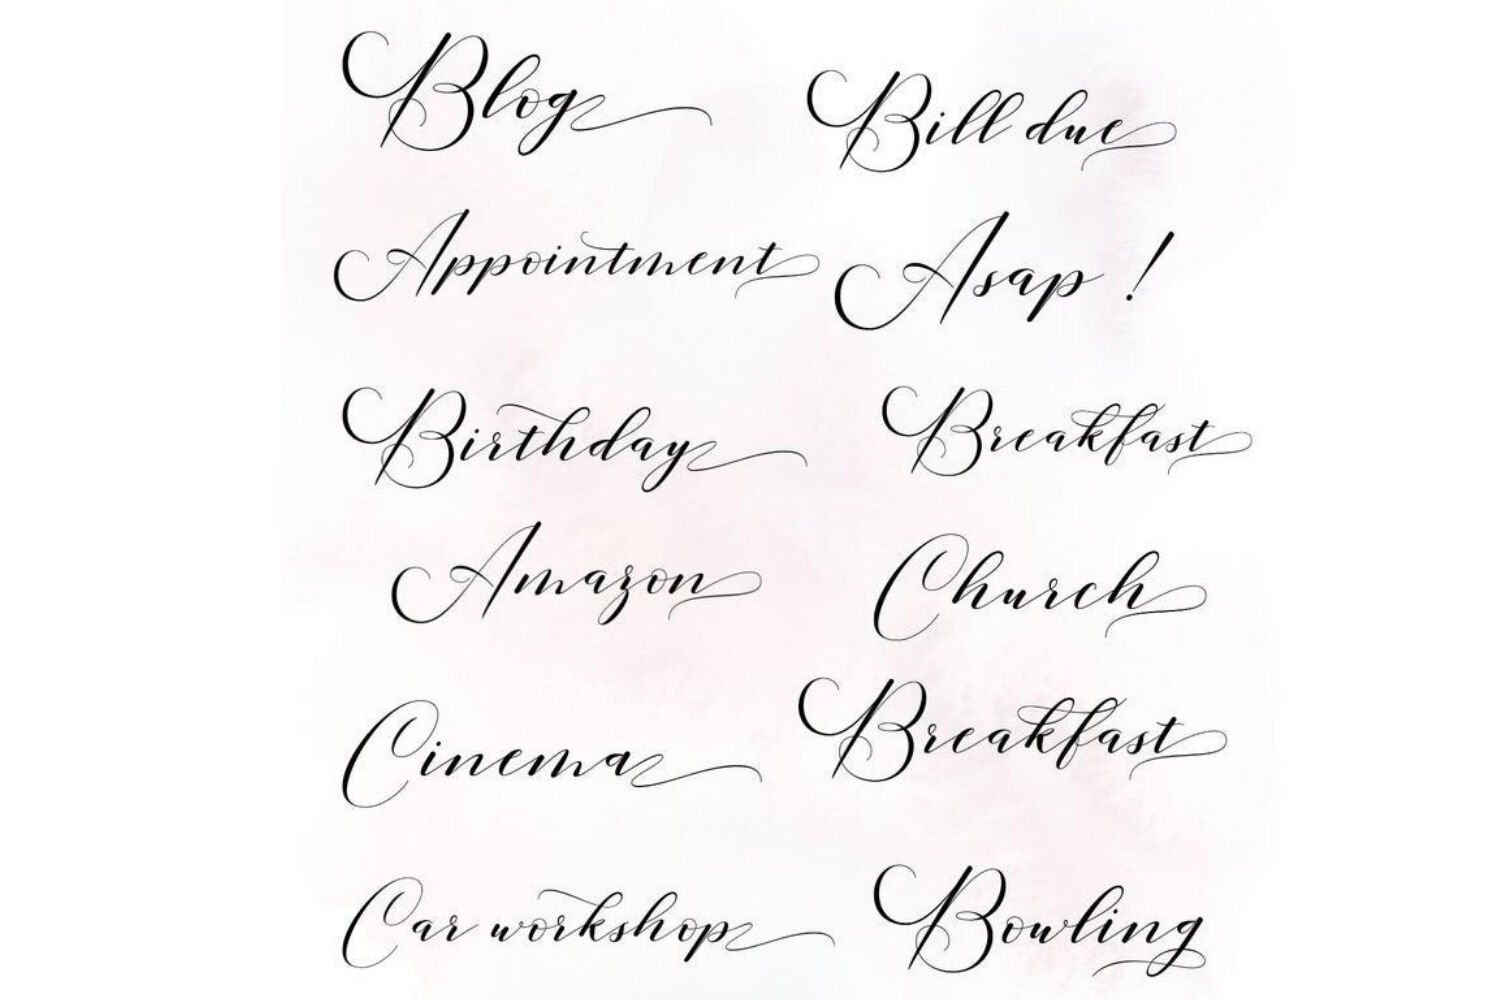 Elegant Black Calligraphic Scripts Stickers By Old Continent Design Thehungryjpeg Com